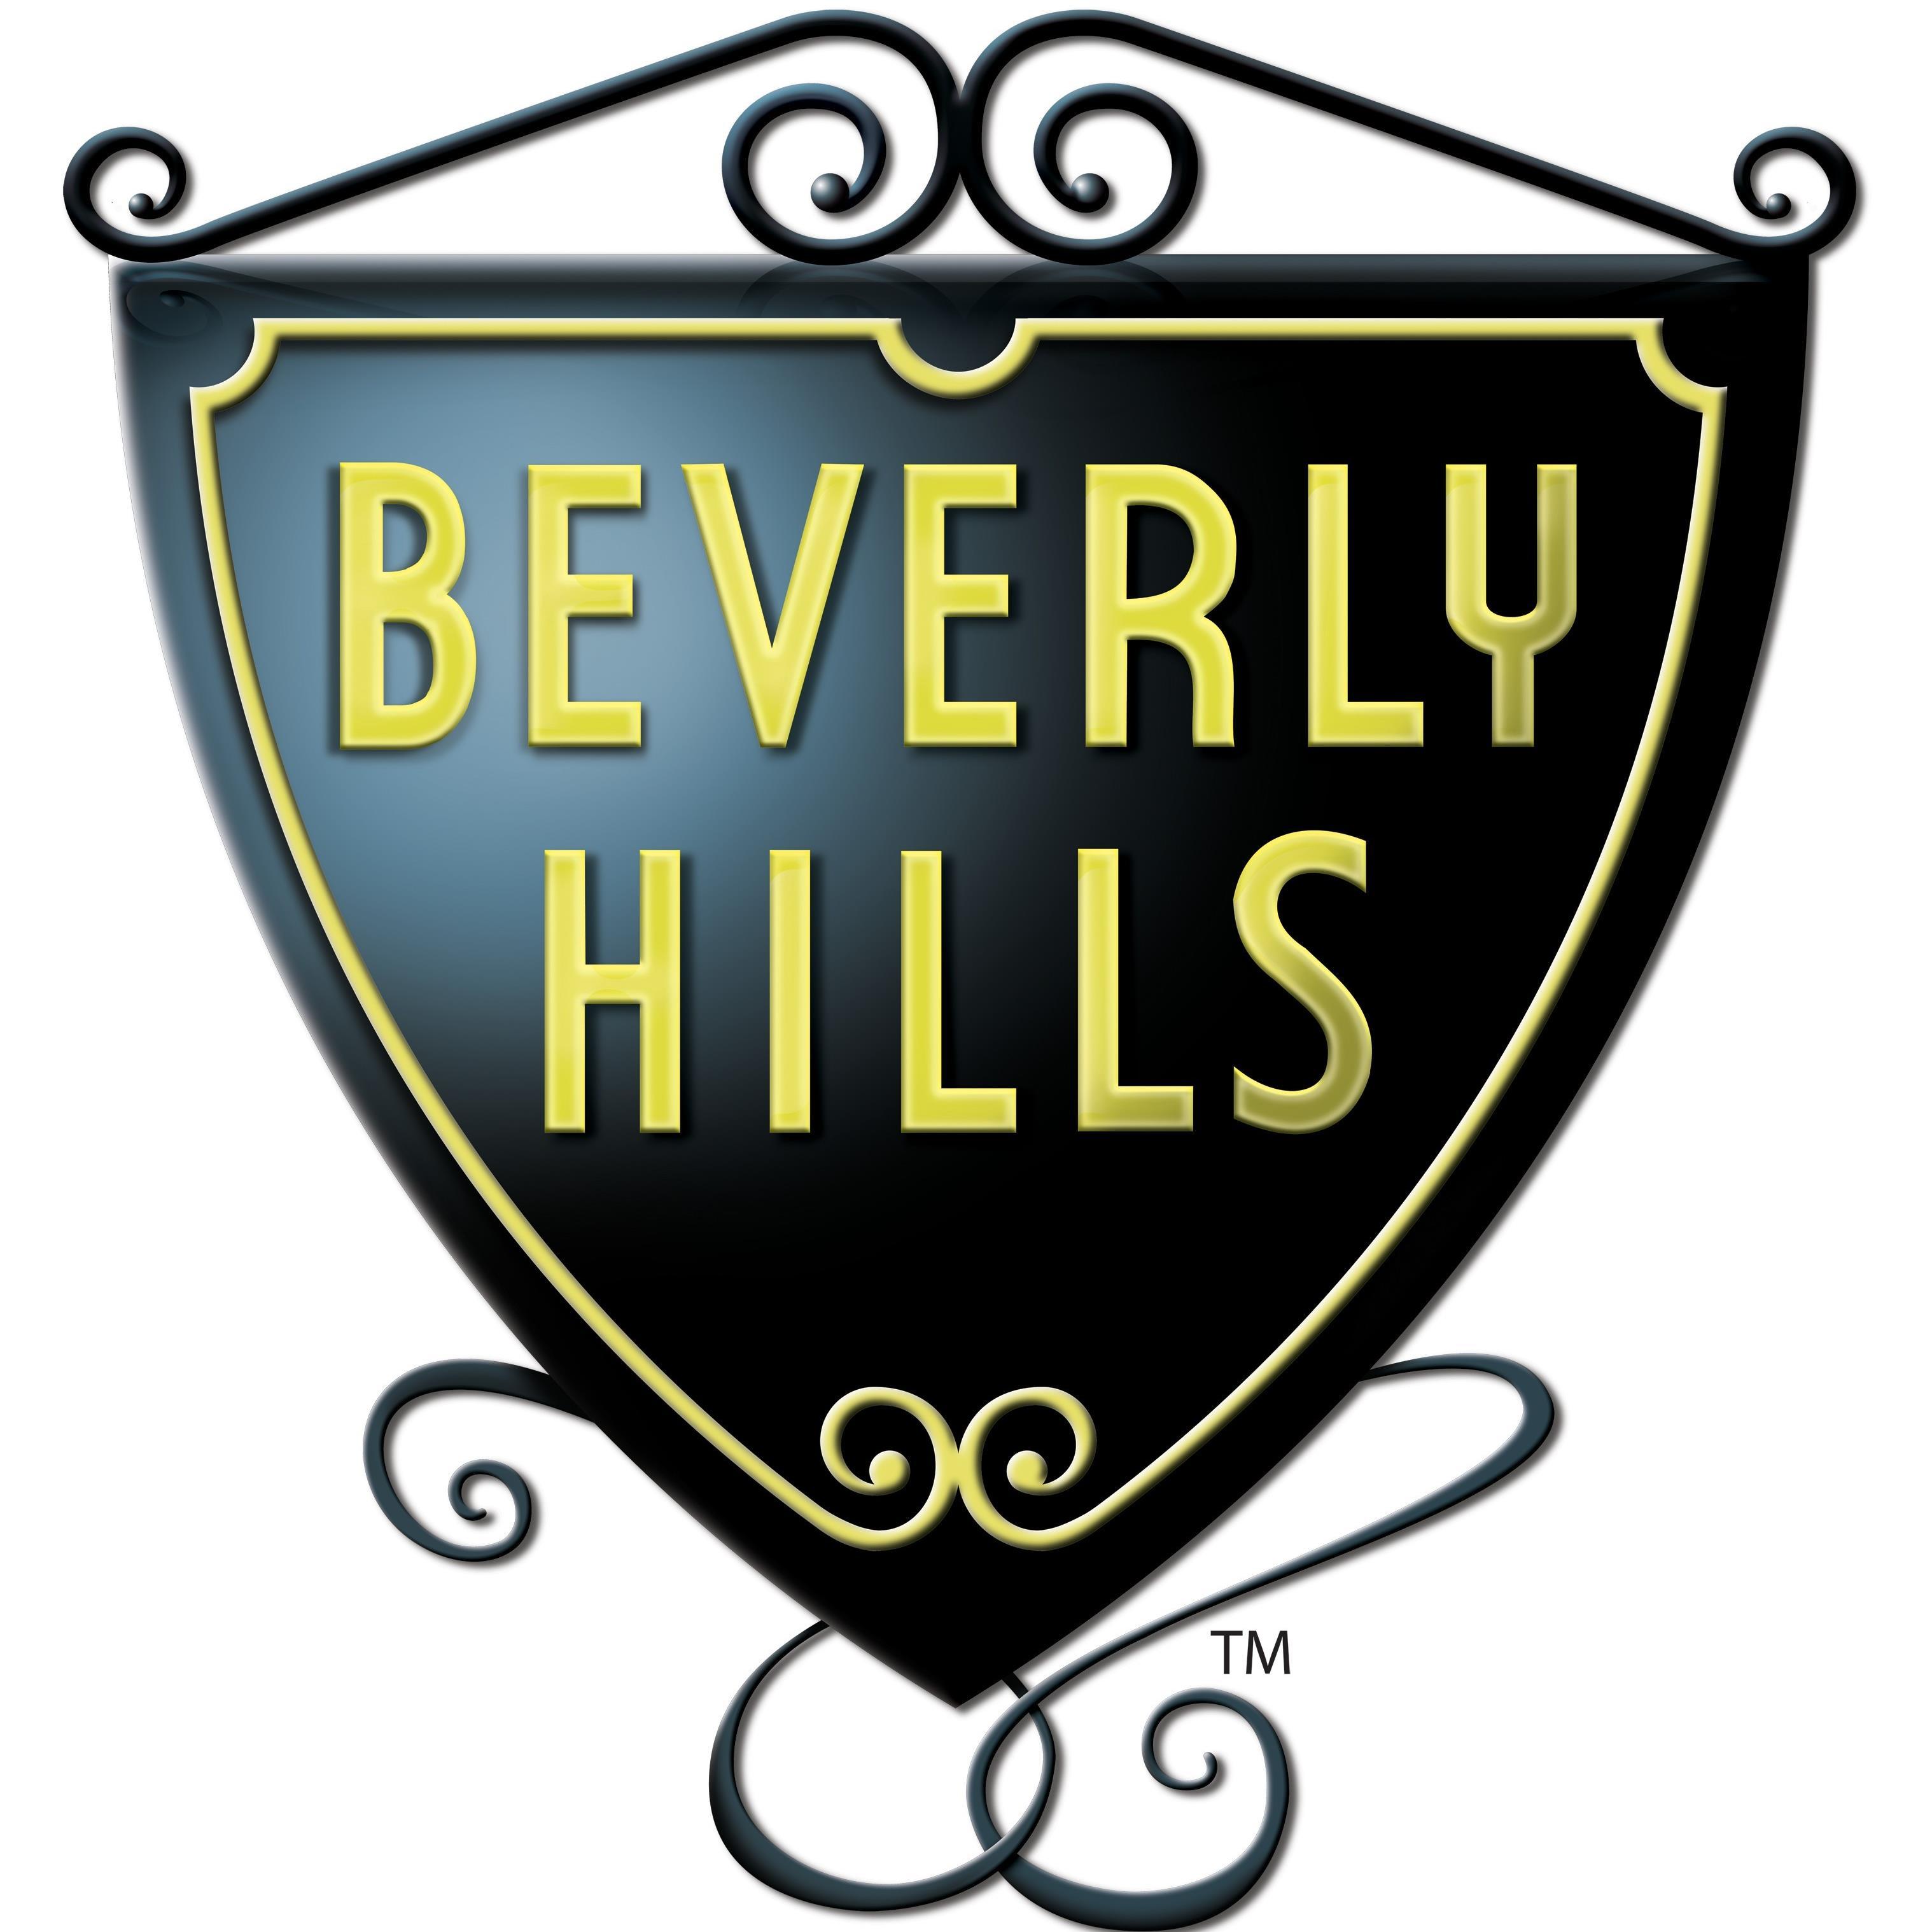 This is the official City of Beverly Hills Public Works/Utilities Page